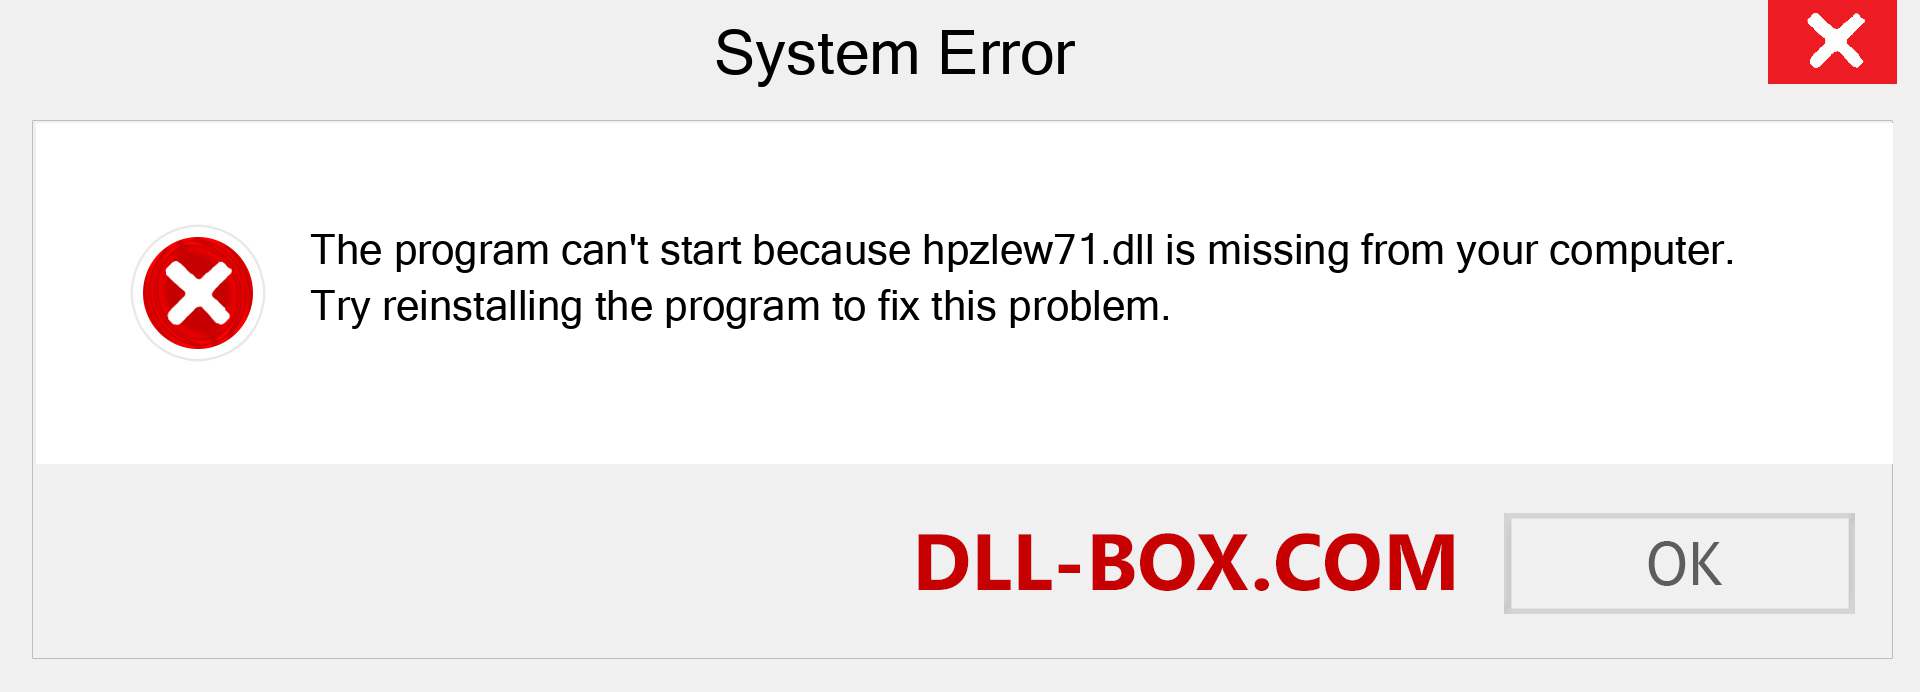  hpzlew71.dll file is missing?. Download for Windows 7, 8, 10 - Fix  hpzlew71 dll Missing Error on Windows, photos, images